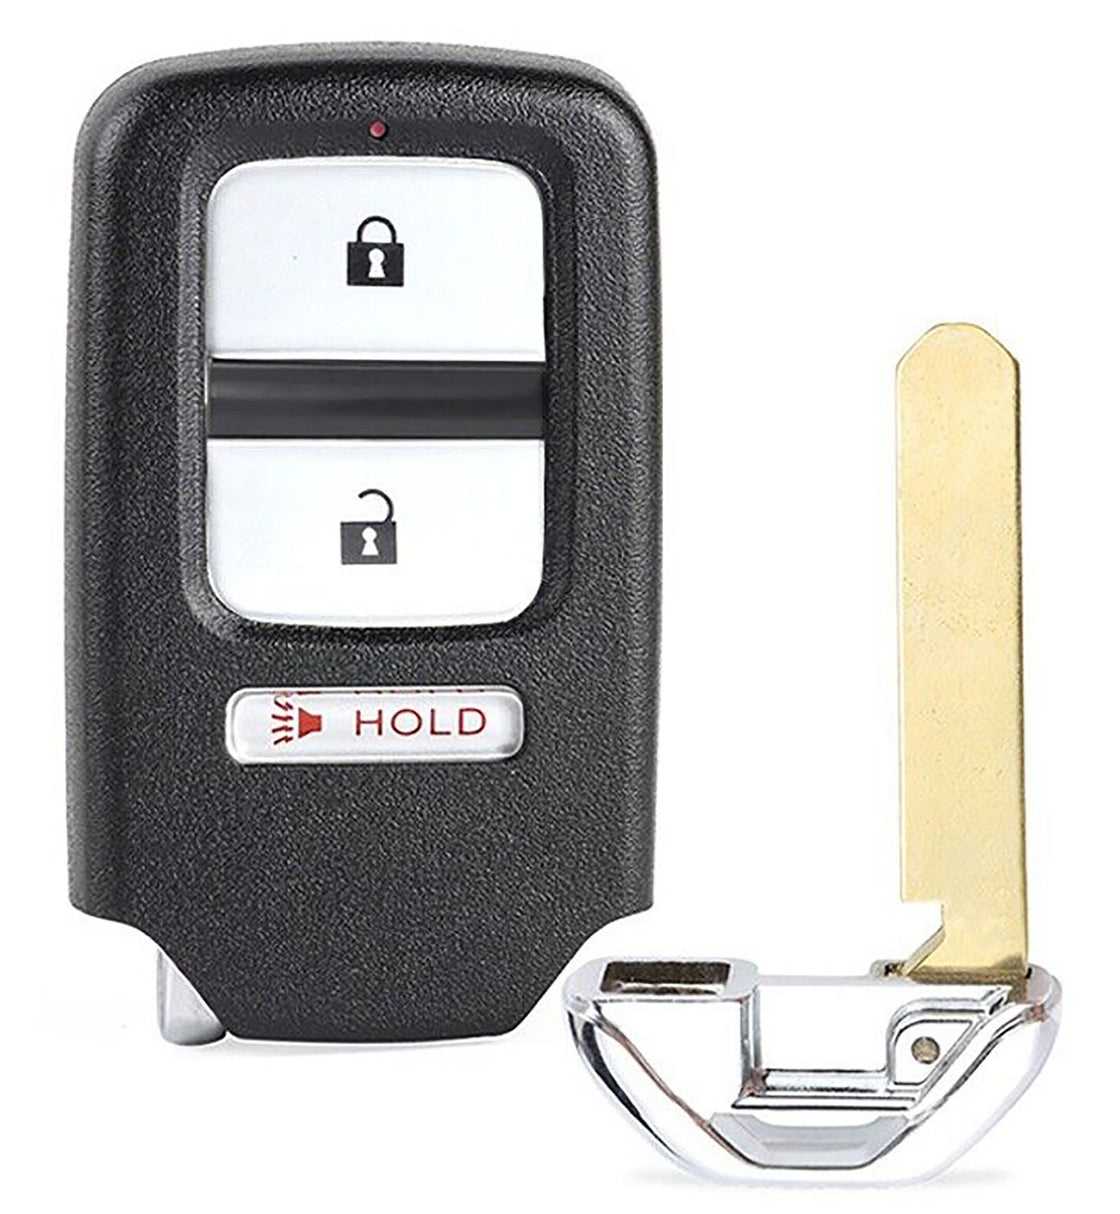 1x New Replacement Proximity Remote Key Fob Compatible with & Fit For Honda Vehicles KR5V1X - MPN KR5V1X-02